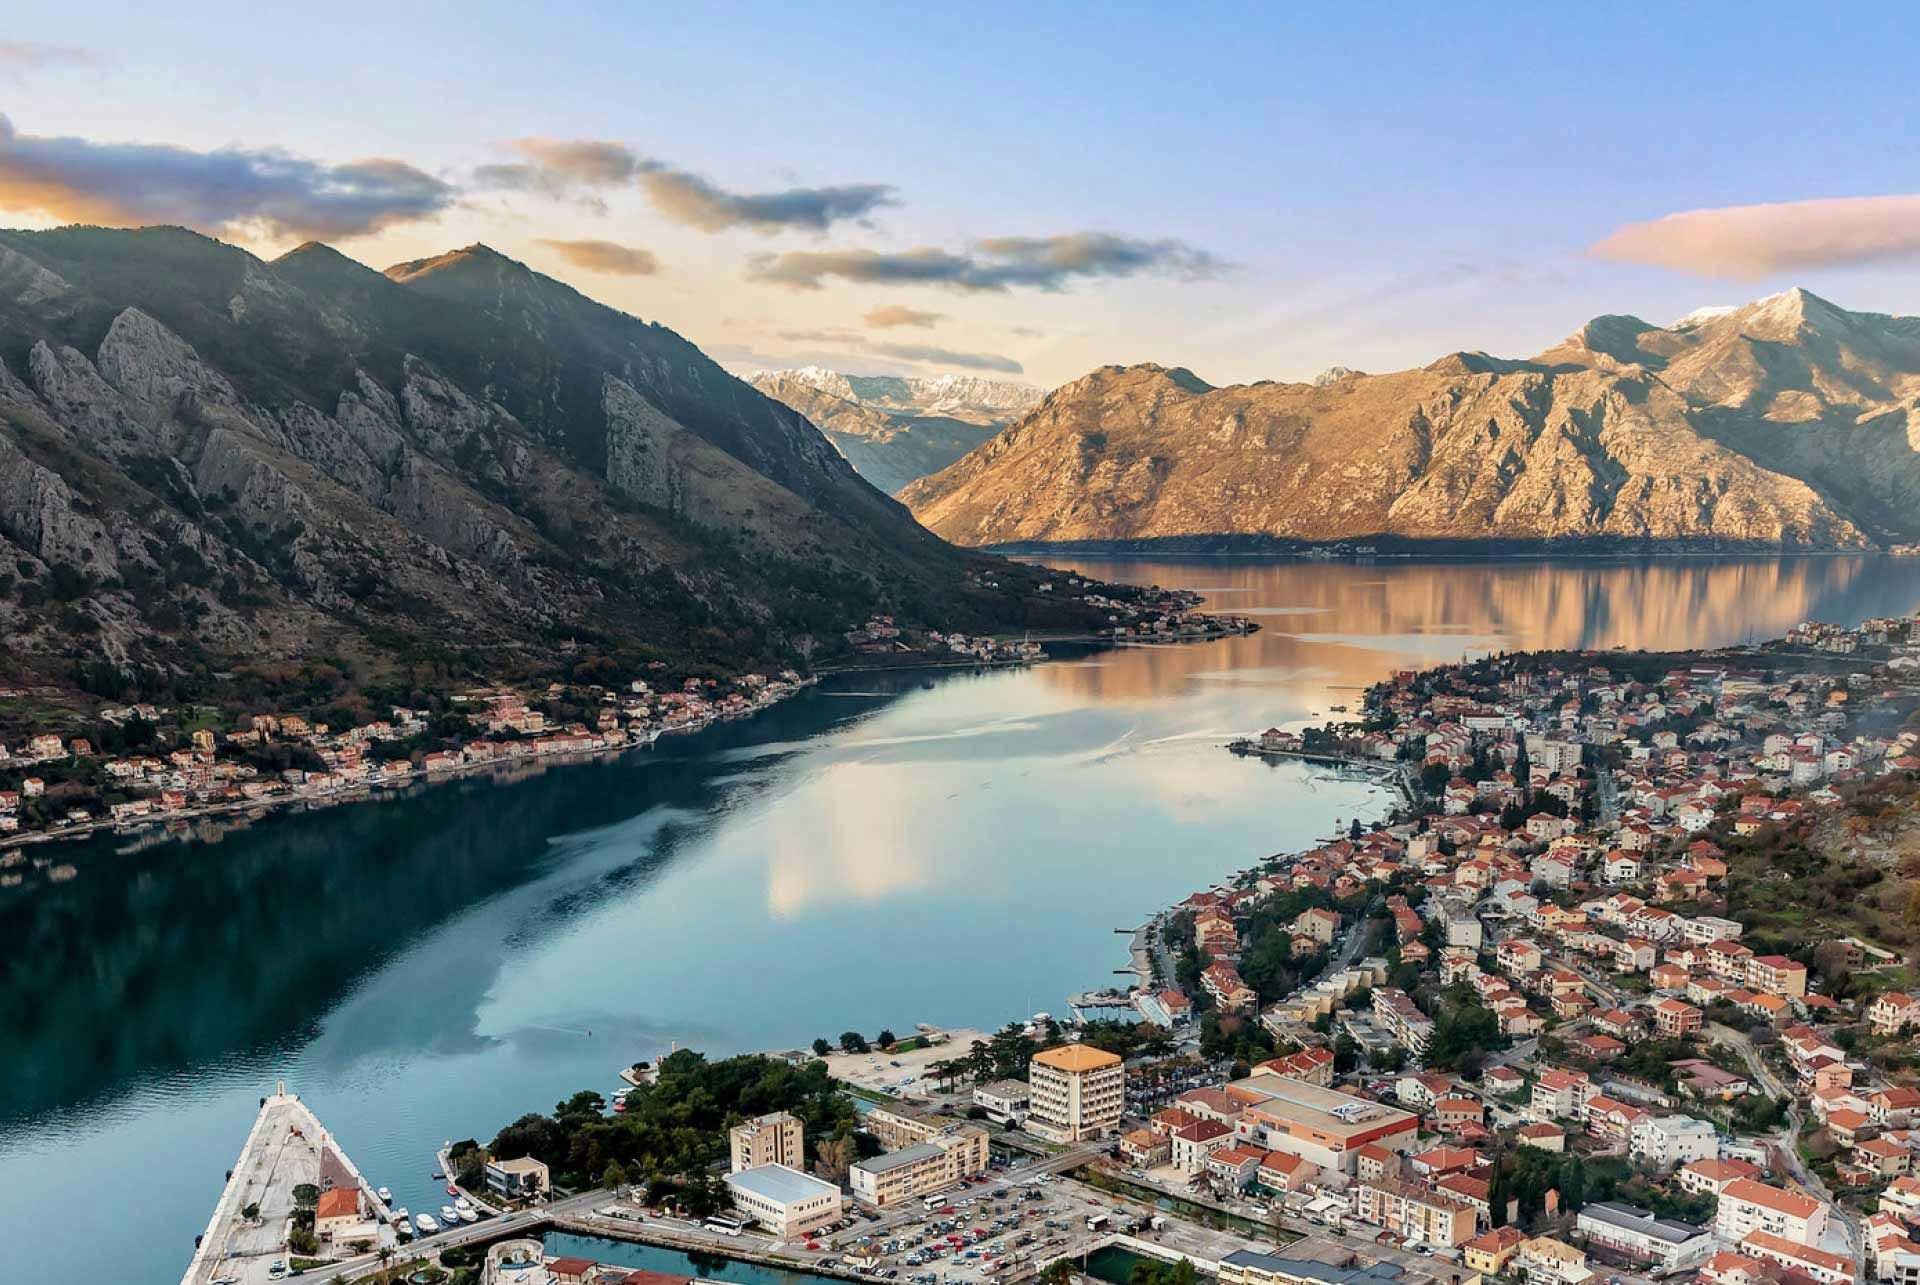 View over Kotor from the top of the town walls